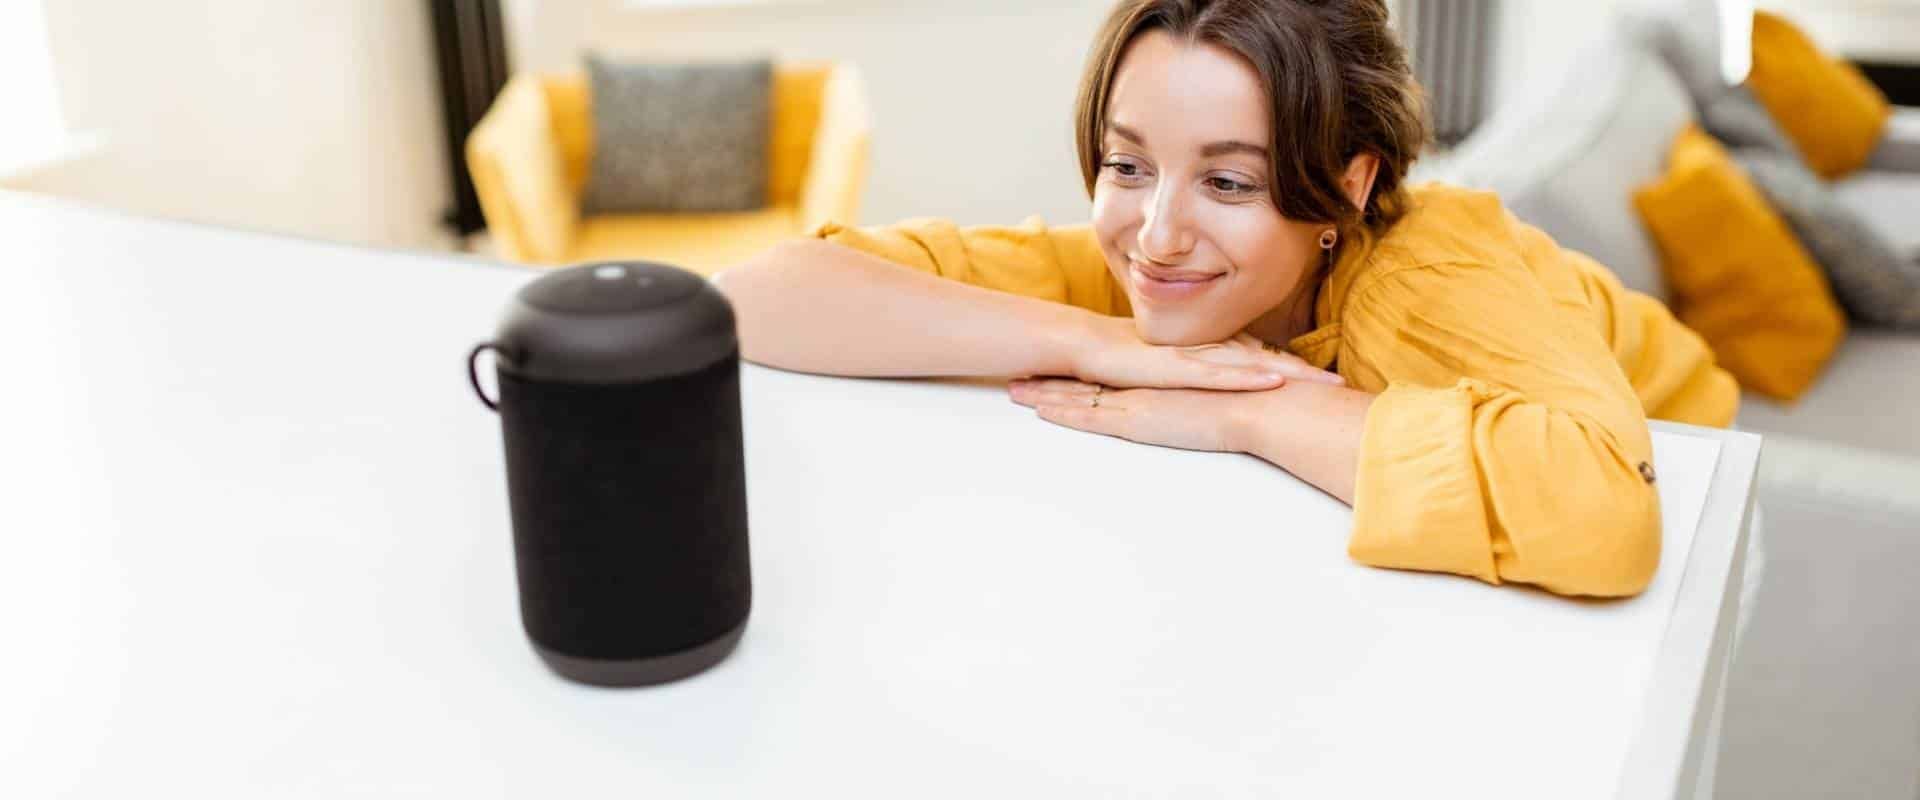 The voice: control your home by having a conversation